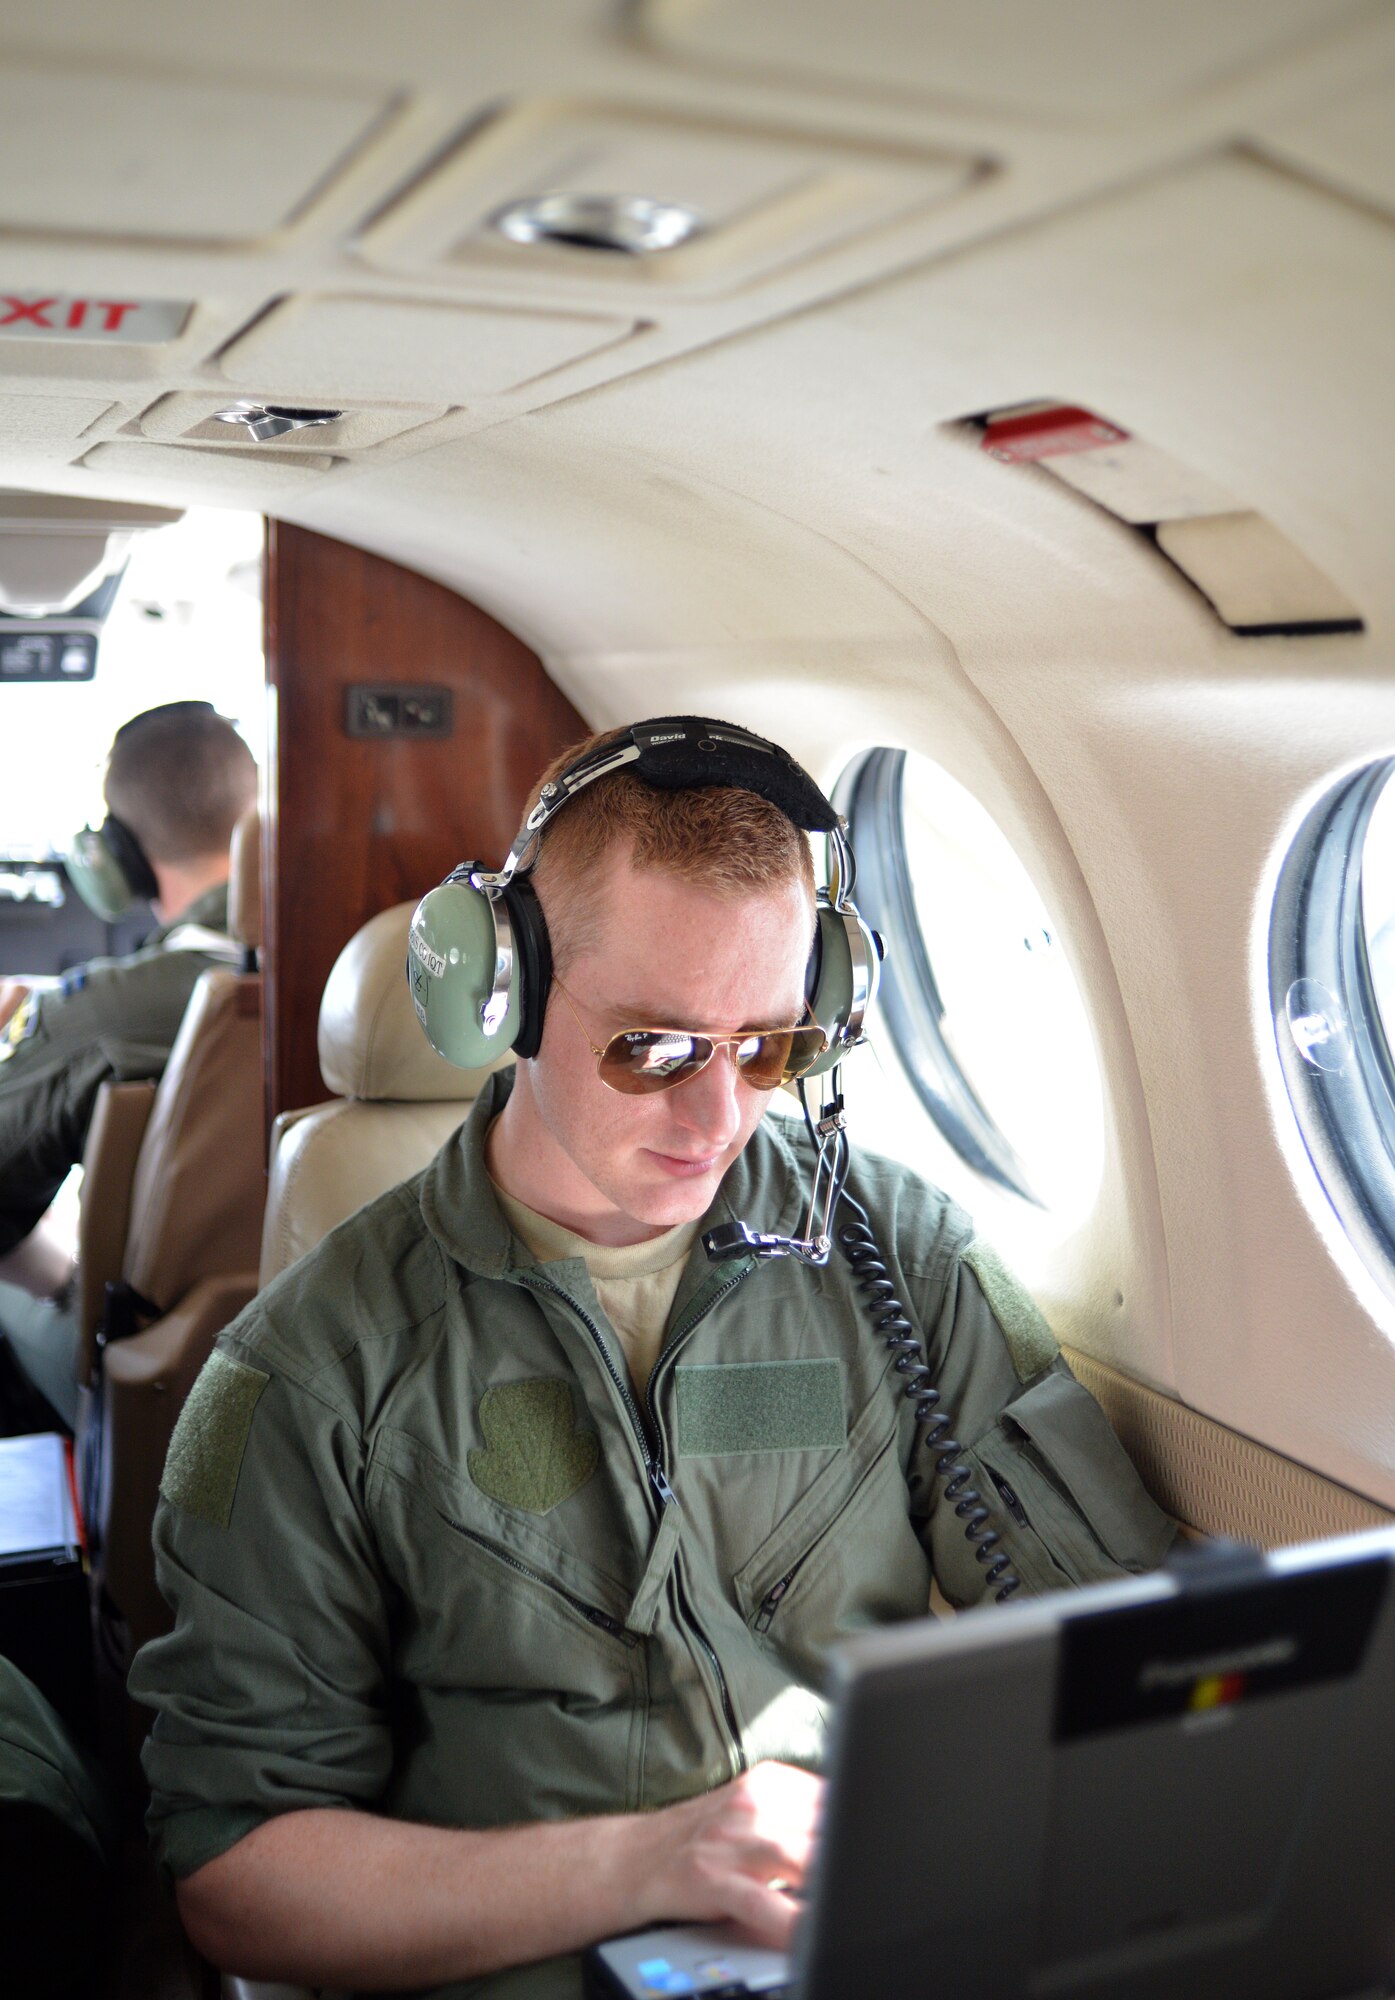 Tactical systems operators and students assigned to the 306th Intelligence Squadron perform airborne Intelligence, Surveillance and Reconnaissance procedures aboard a C-12 King Air aircraft at Beale Air Force Base, Calif., April 5, 2013. The squadron, which falls under the 361st ISR group at Hurlburt Field, Fla., instructs more than 150 Airmen each year. (U.S. Air Force photo by Airman 1st Class Drew Buchanan/Released)